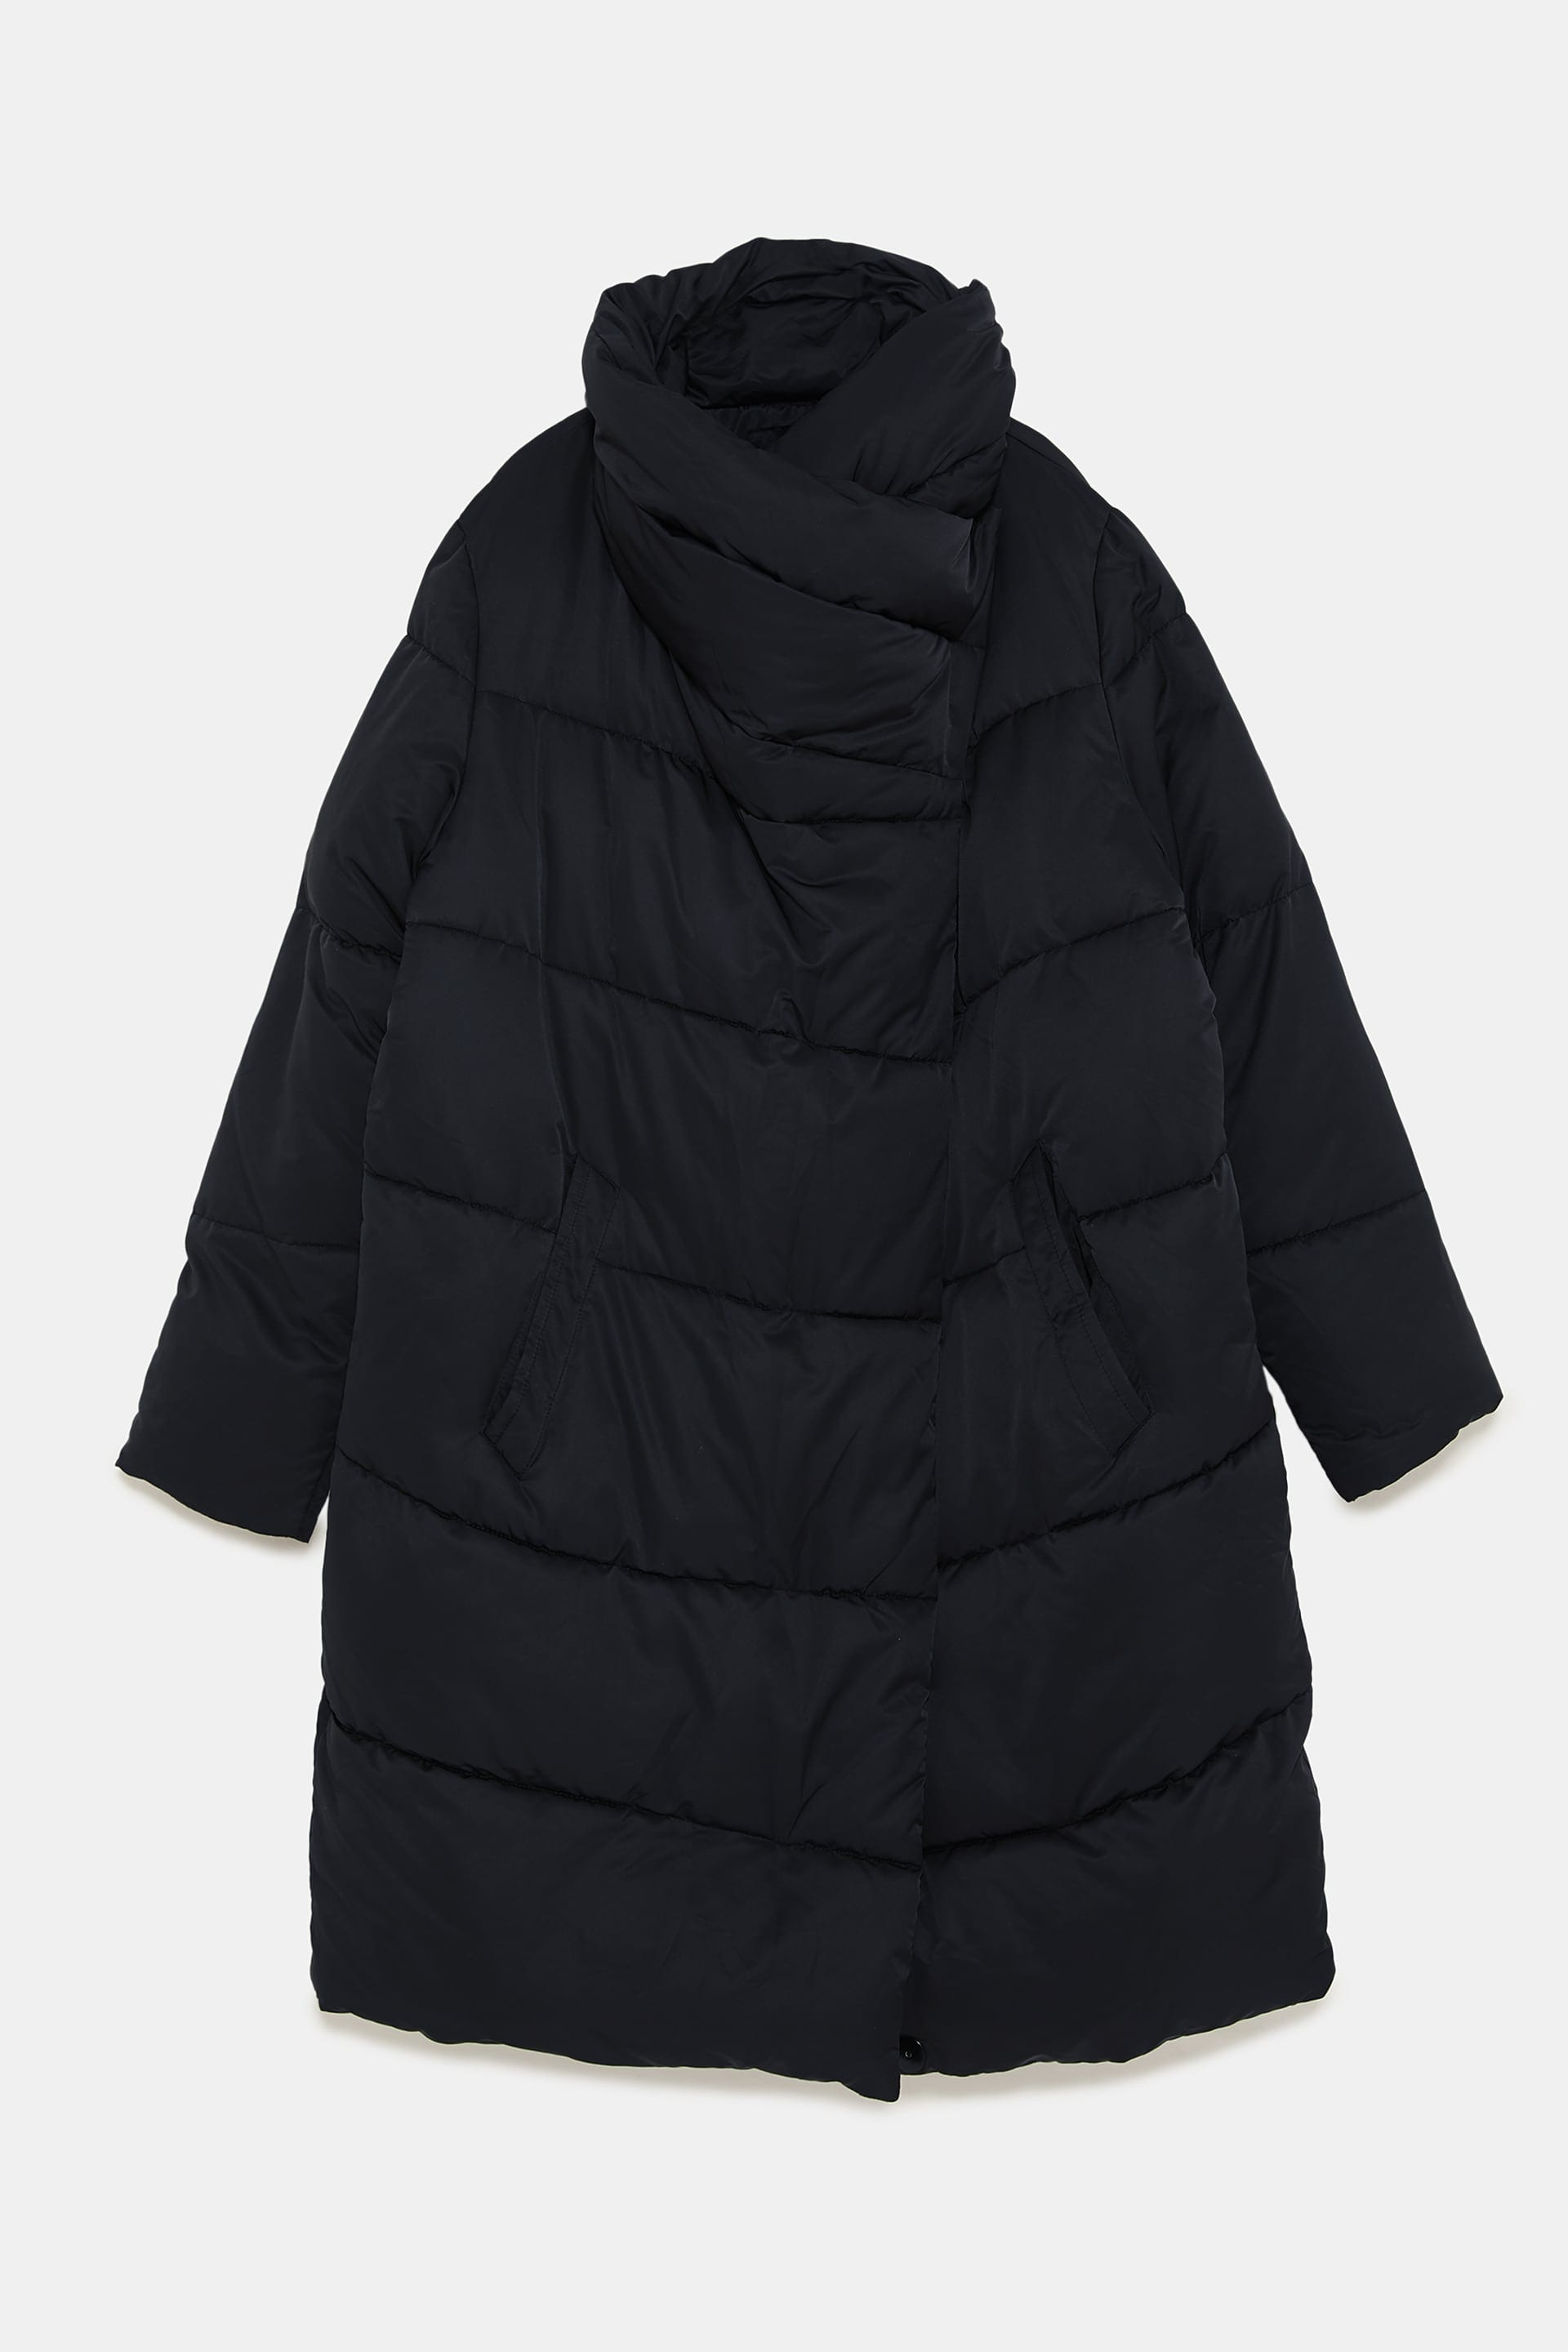 14 Puffer Jackets That Won't Make You Look Like the Michelin Man ...